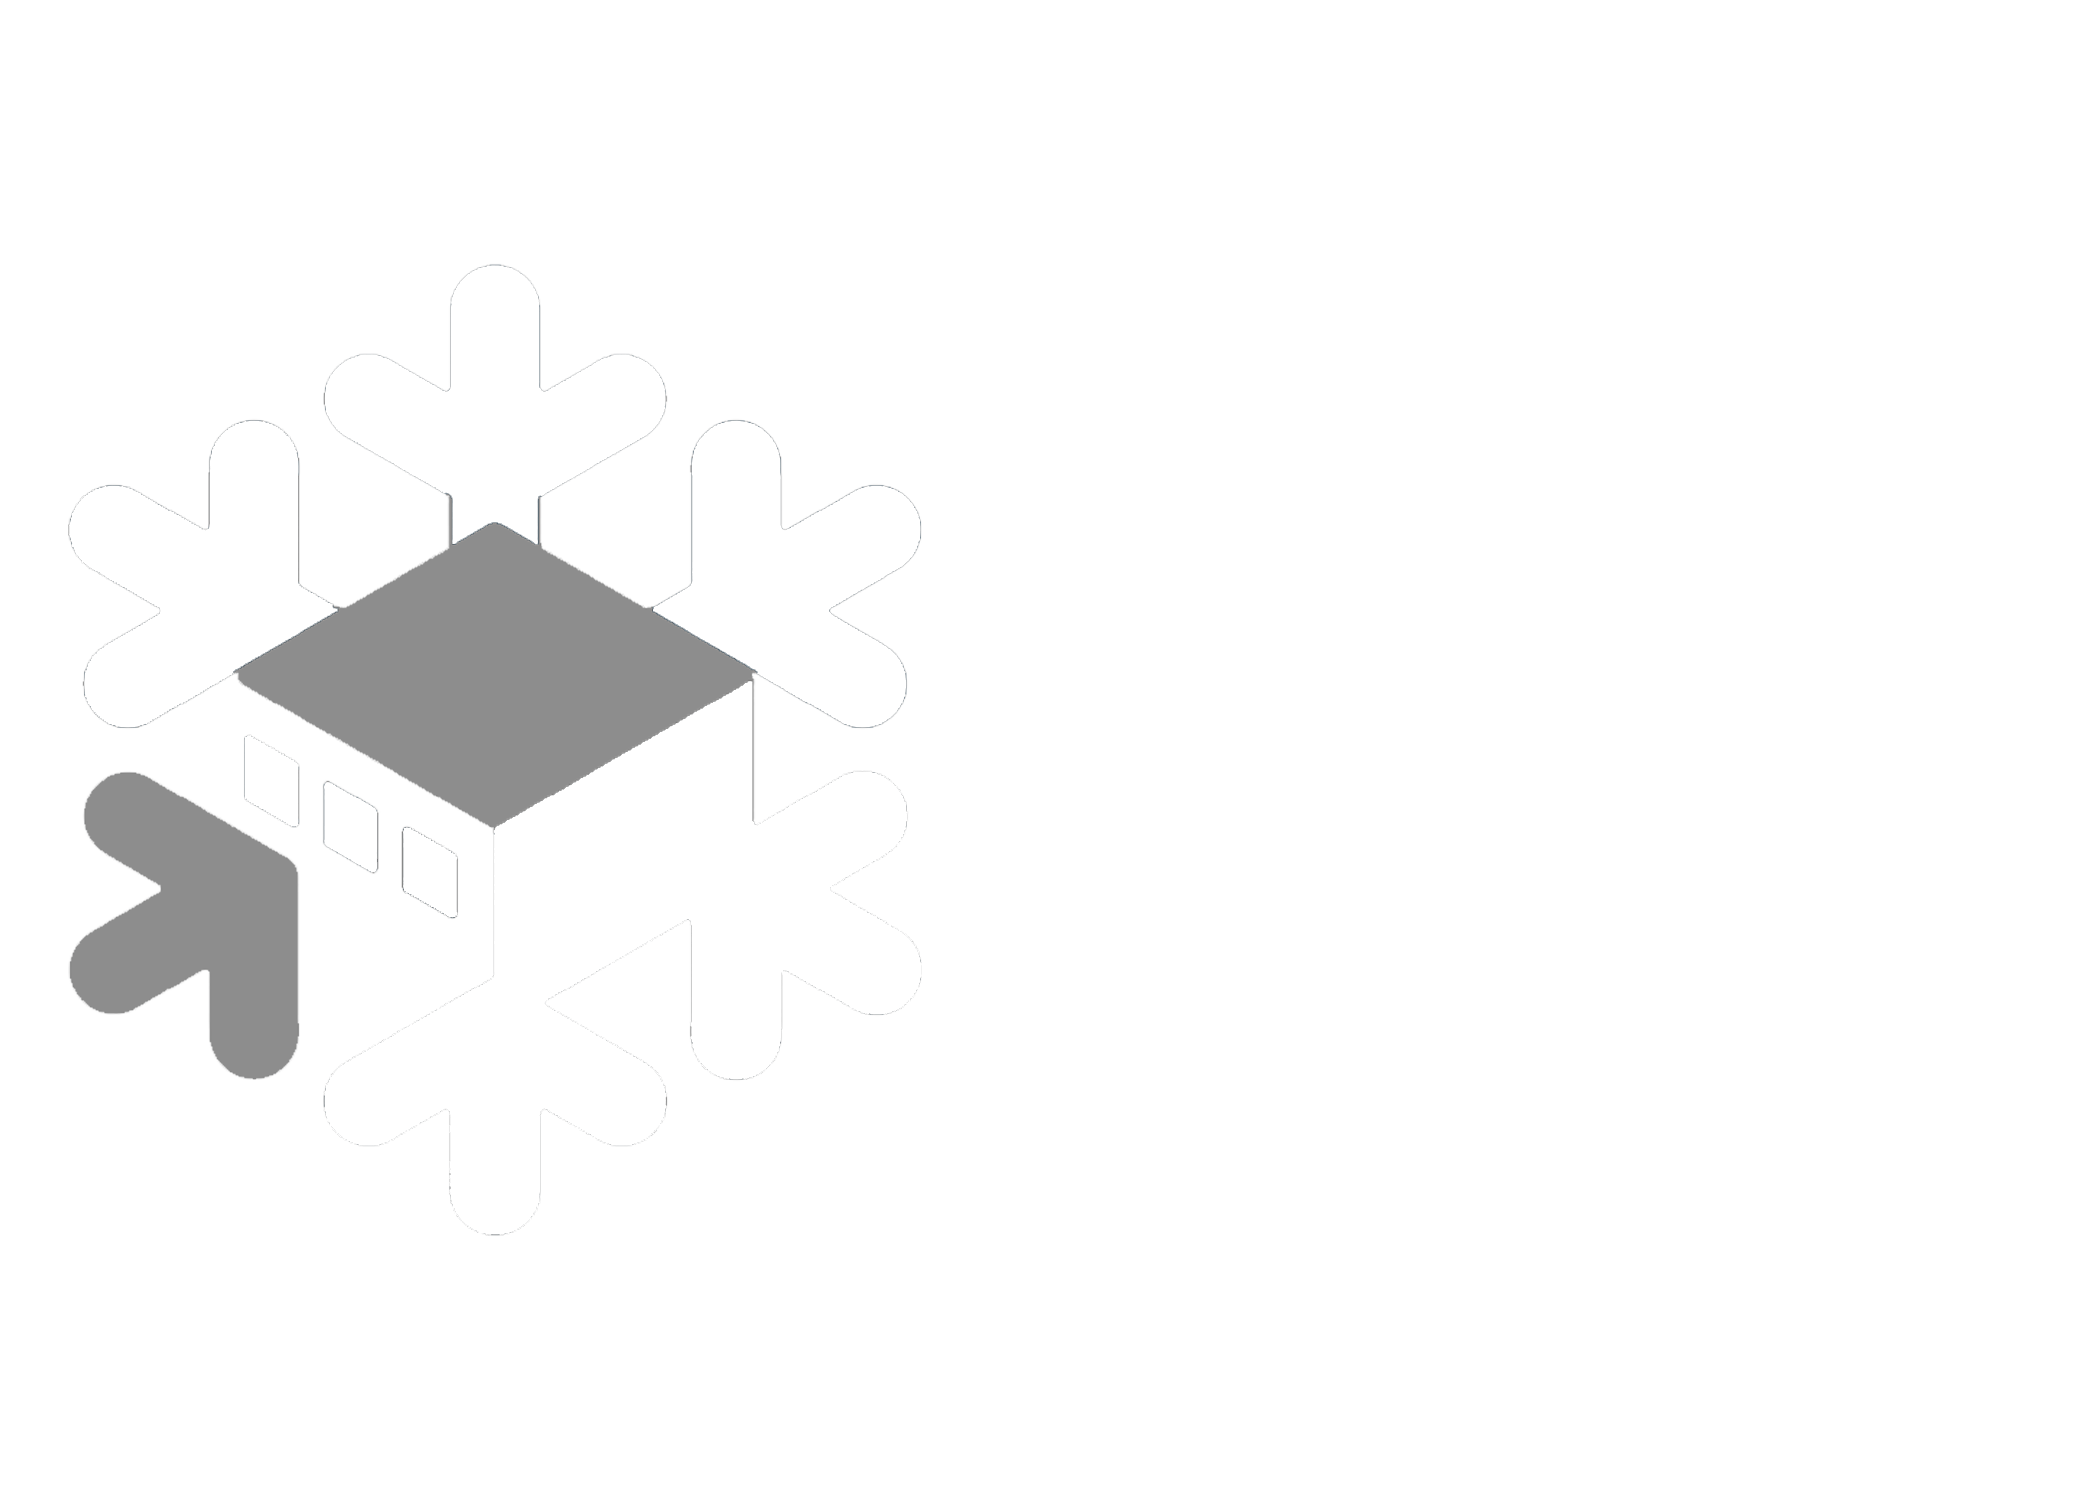 R & G Thermal Services LLC